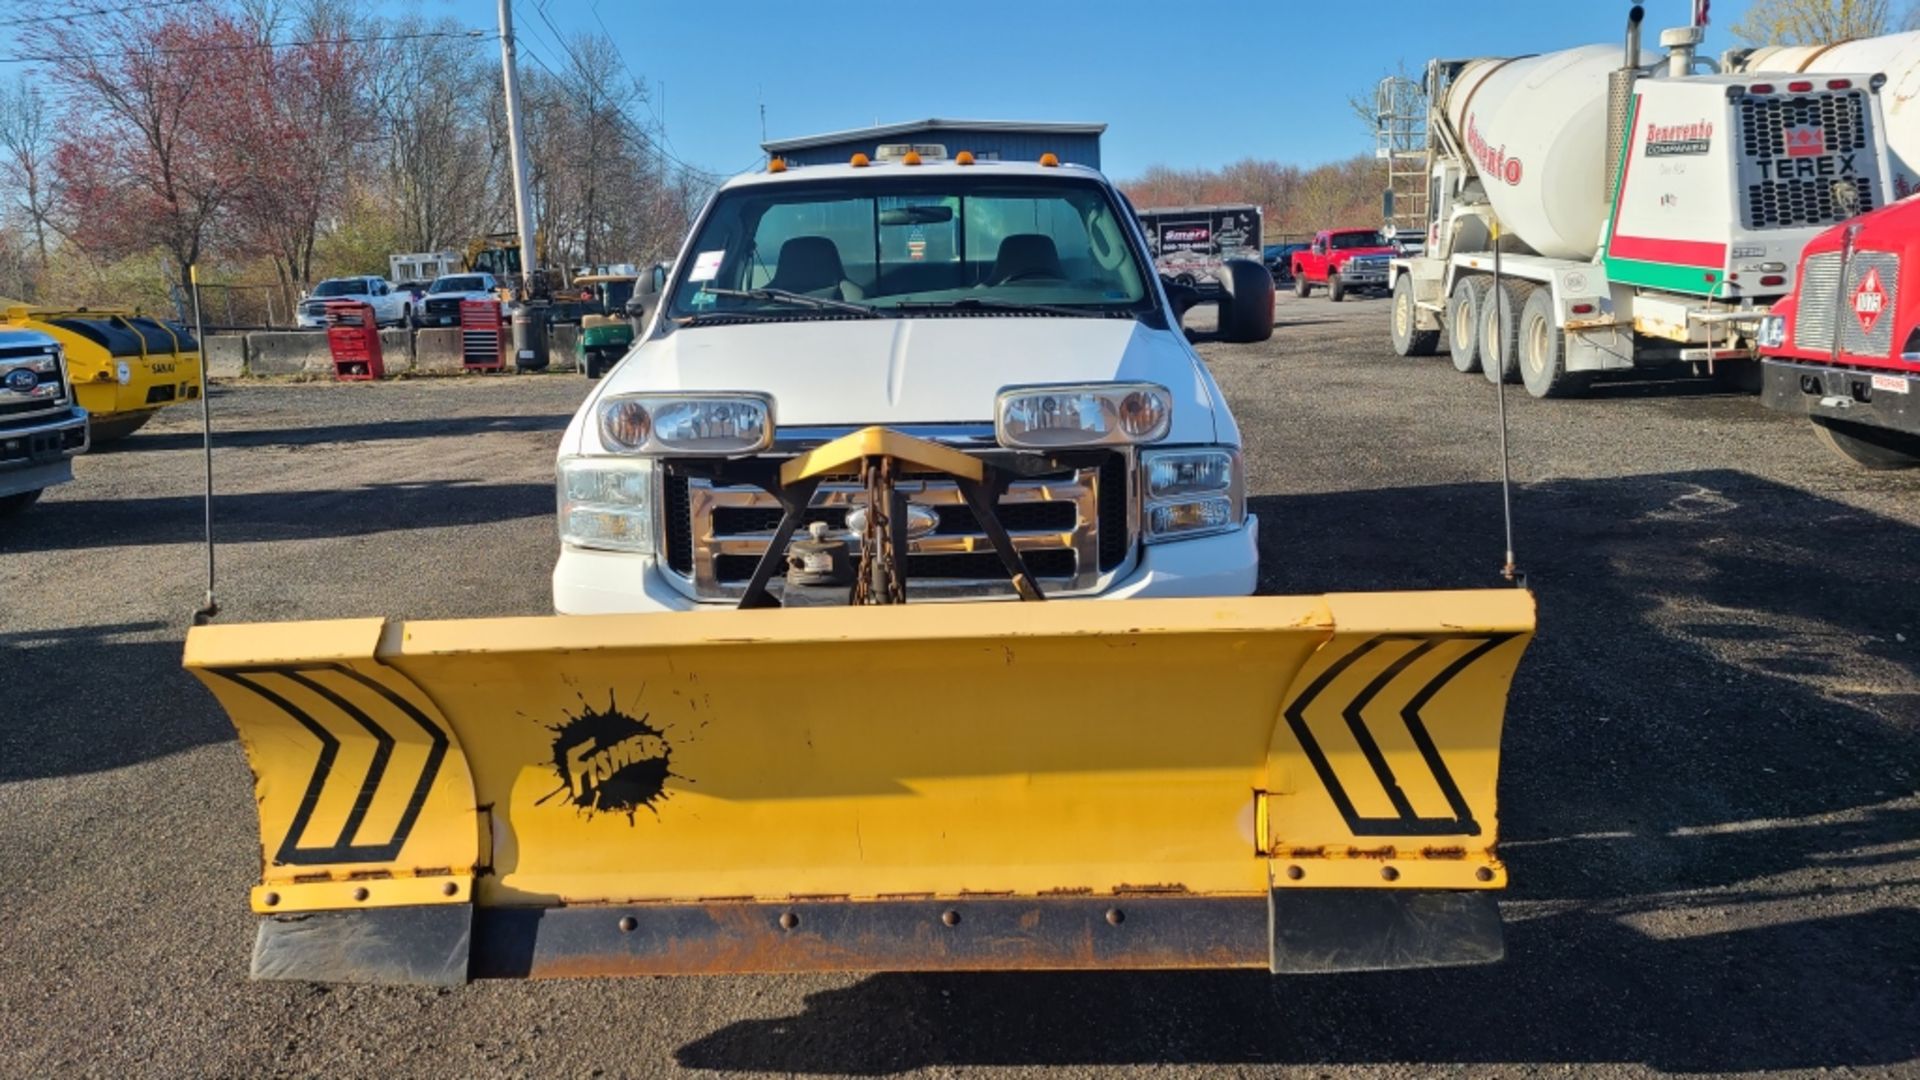 2006 Ford F350 Utility Truck With Plow - Image 2 of 11